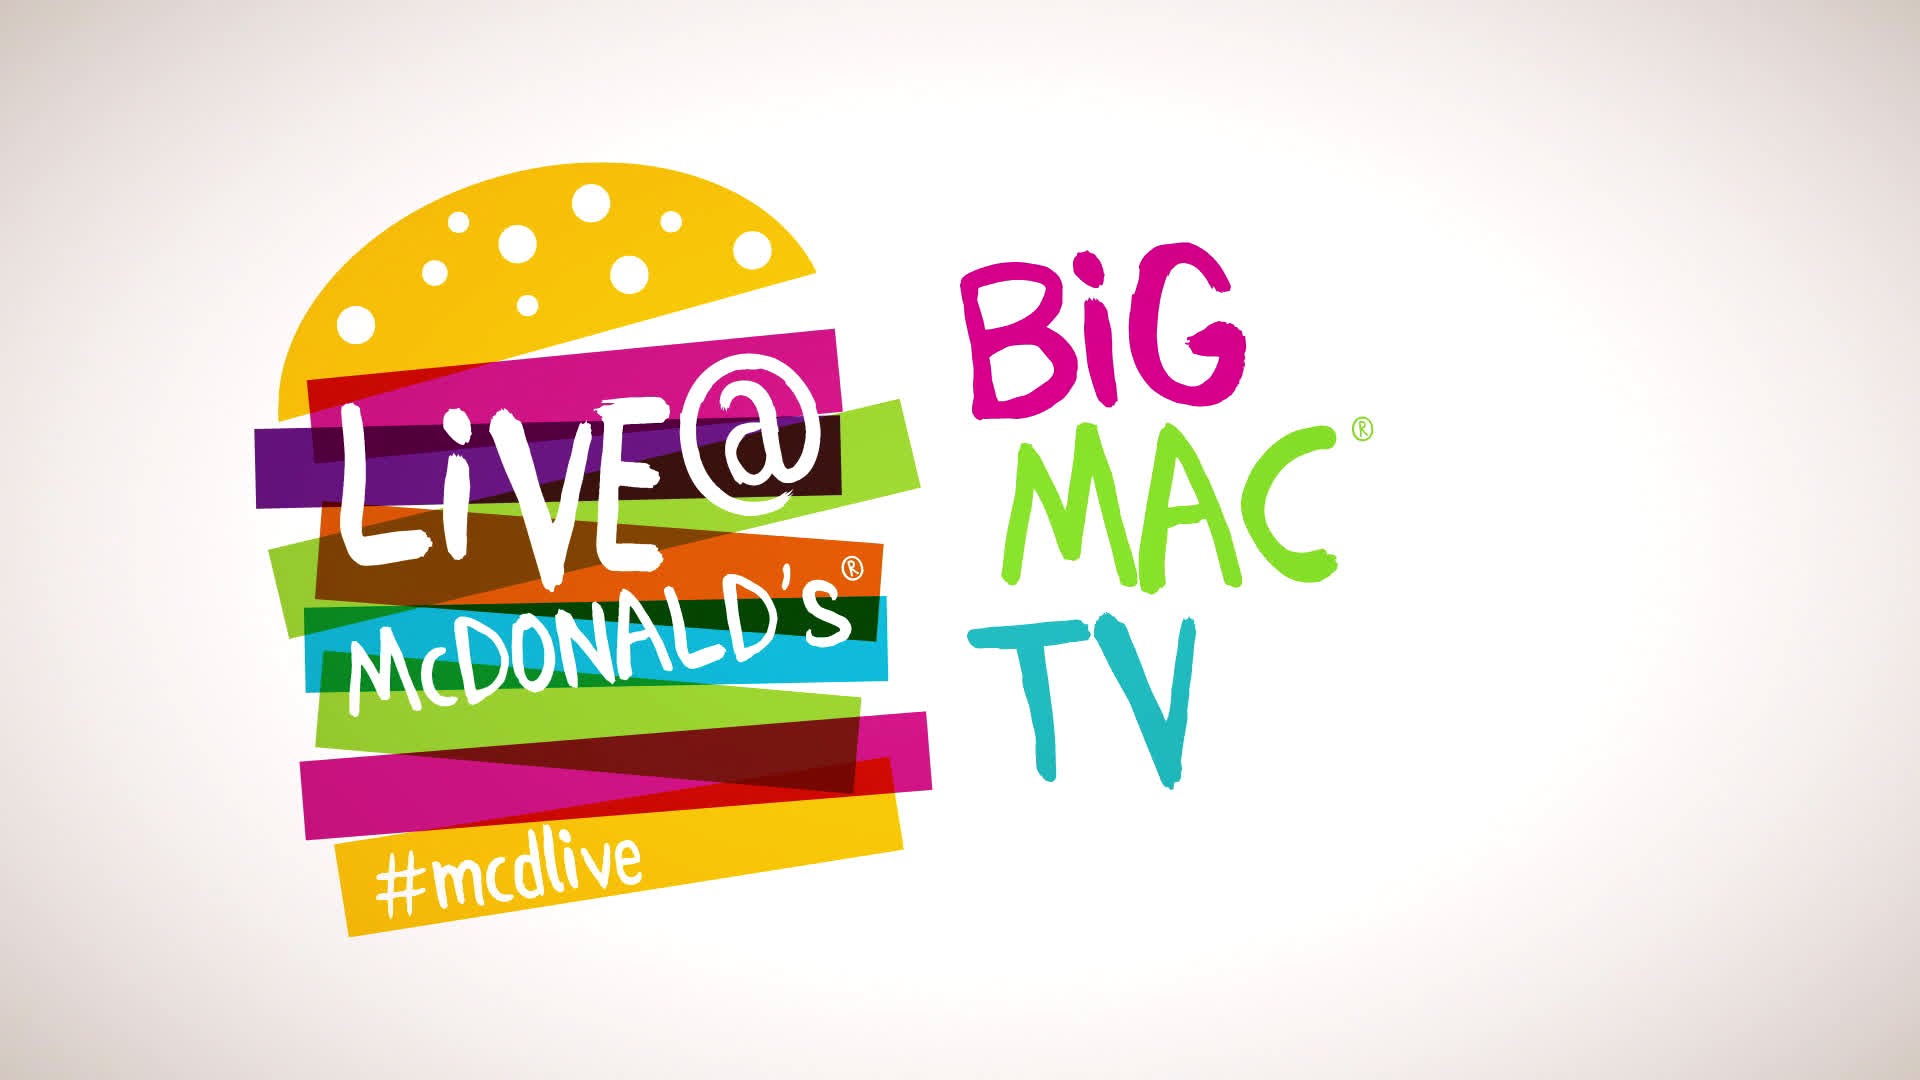 Live@McDonald's is the largest national social media and live event of its kind